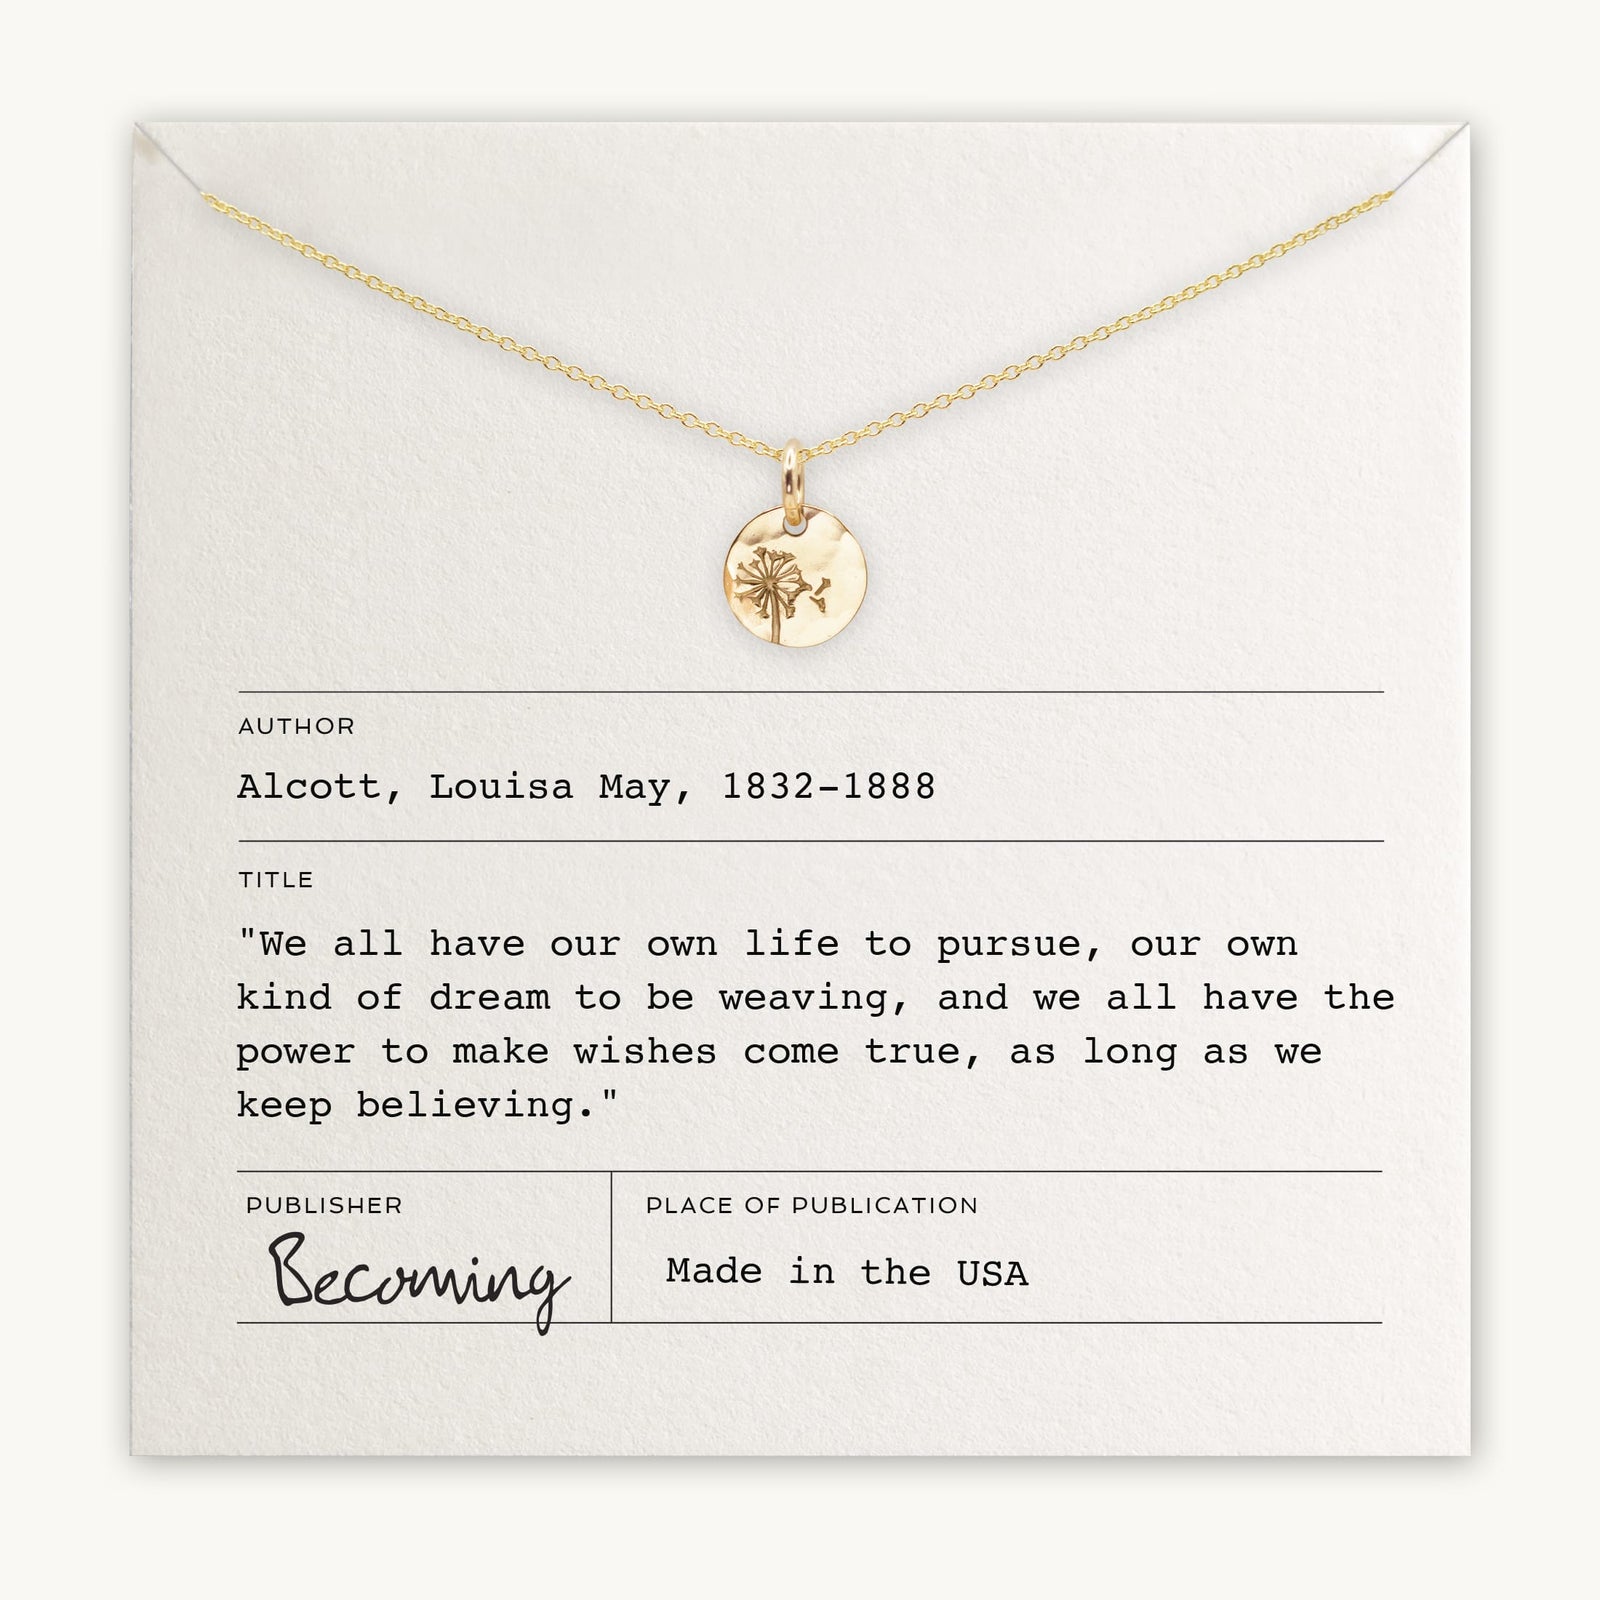 Dandelion Wishes Necklace by Becoming Jewelry displayed on a card with a quote by Louisa May Alcott.